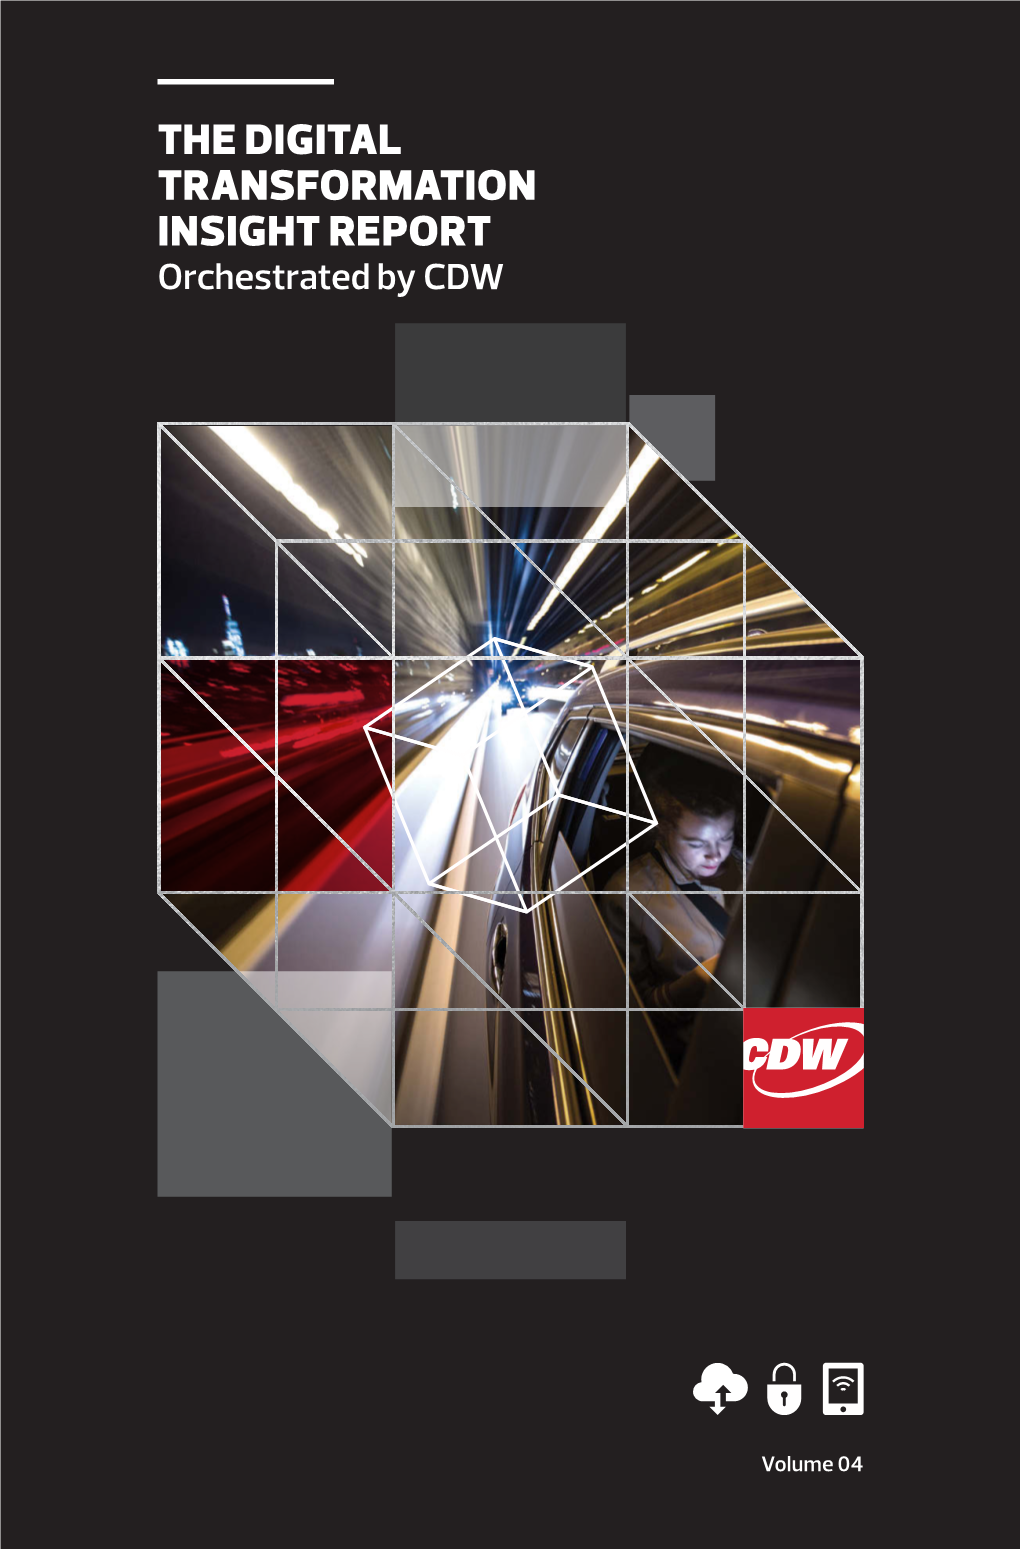 THE DIGITAL TRANSFORMATION INSIGHT REPORT Orchestrated by CDW